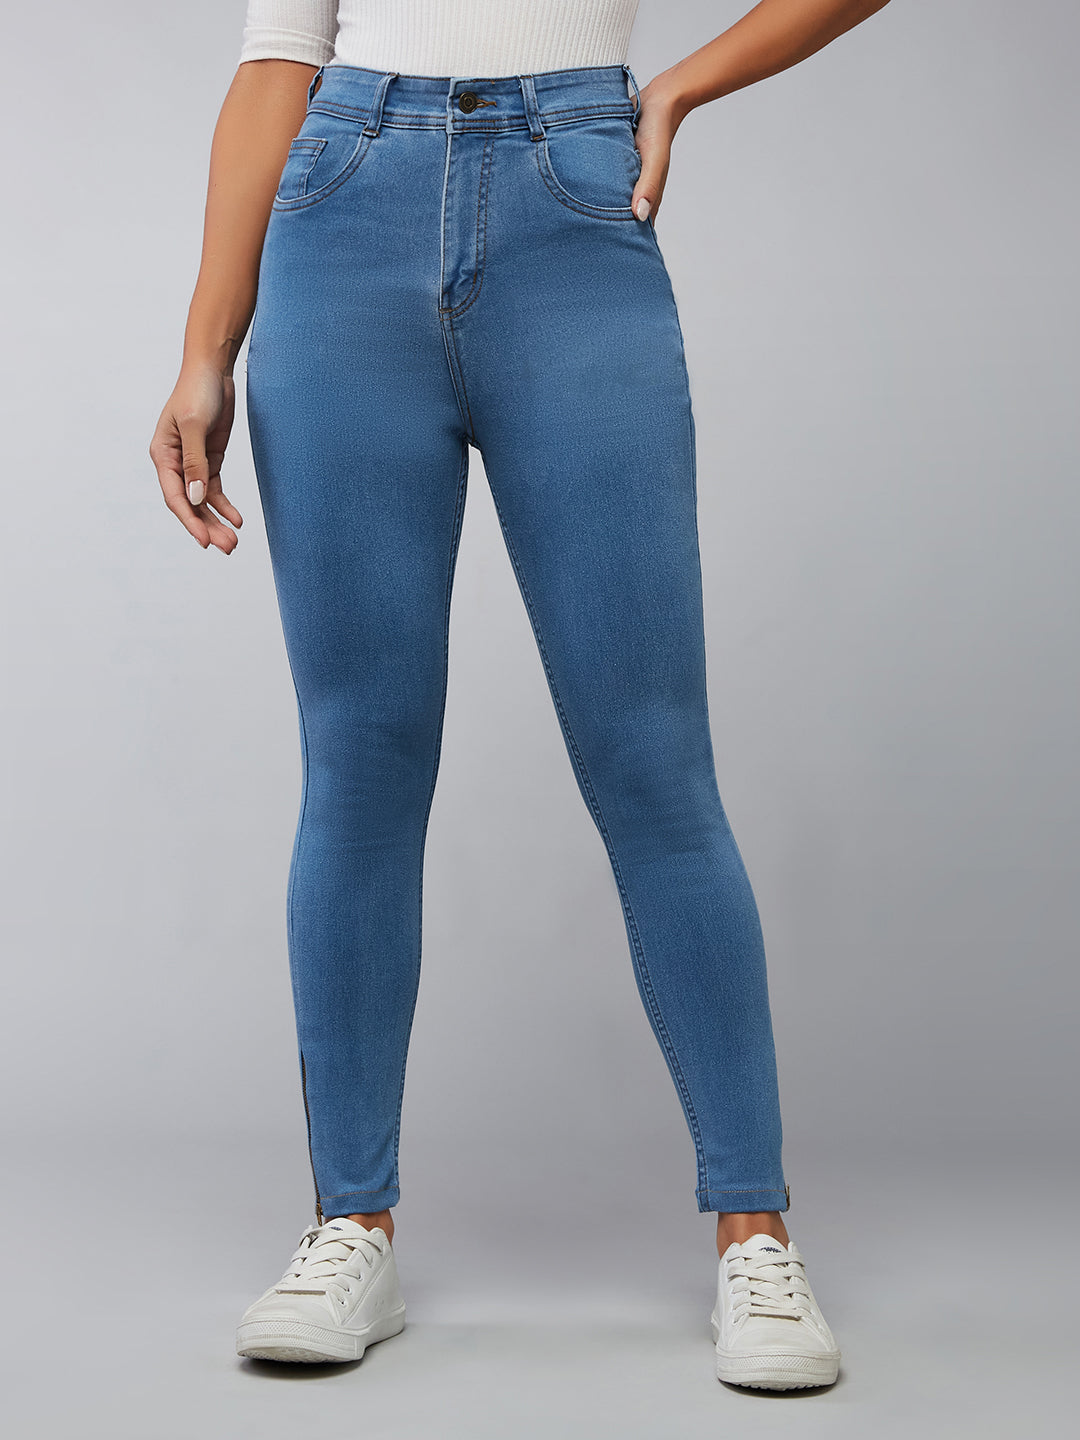 Women's Blue Skinny Fit High Rise Clean Look Cropped Stretchable Denim Jeans